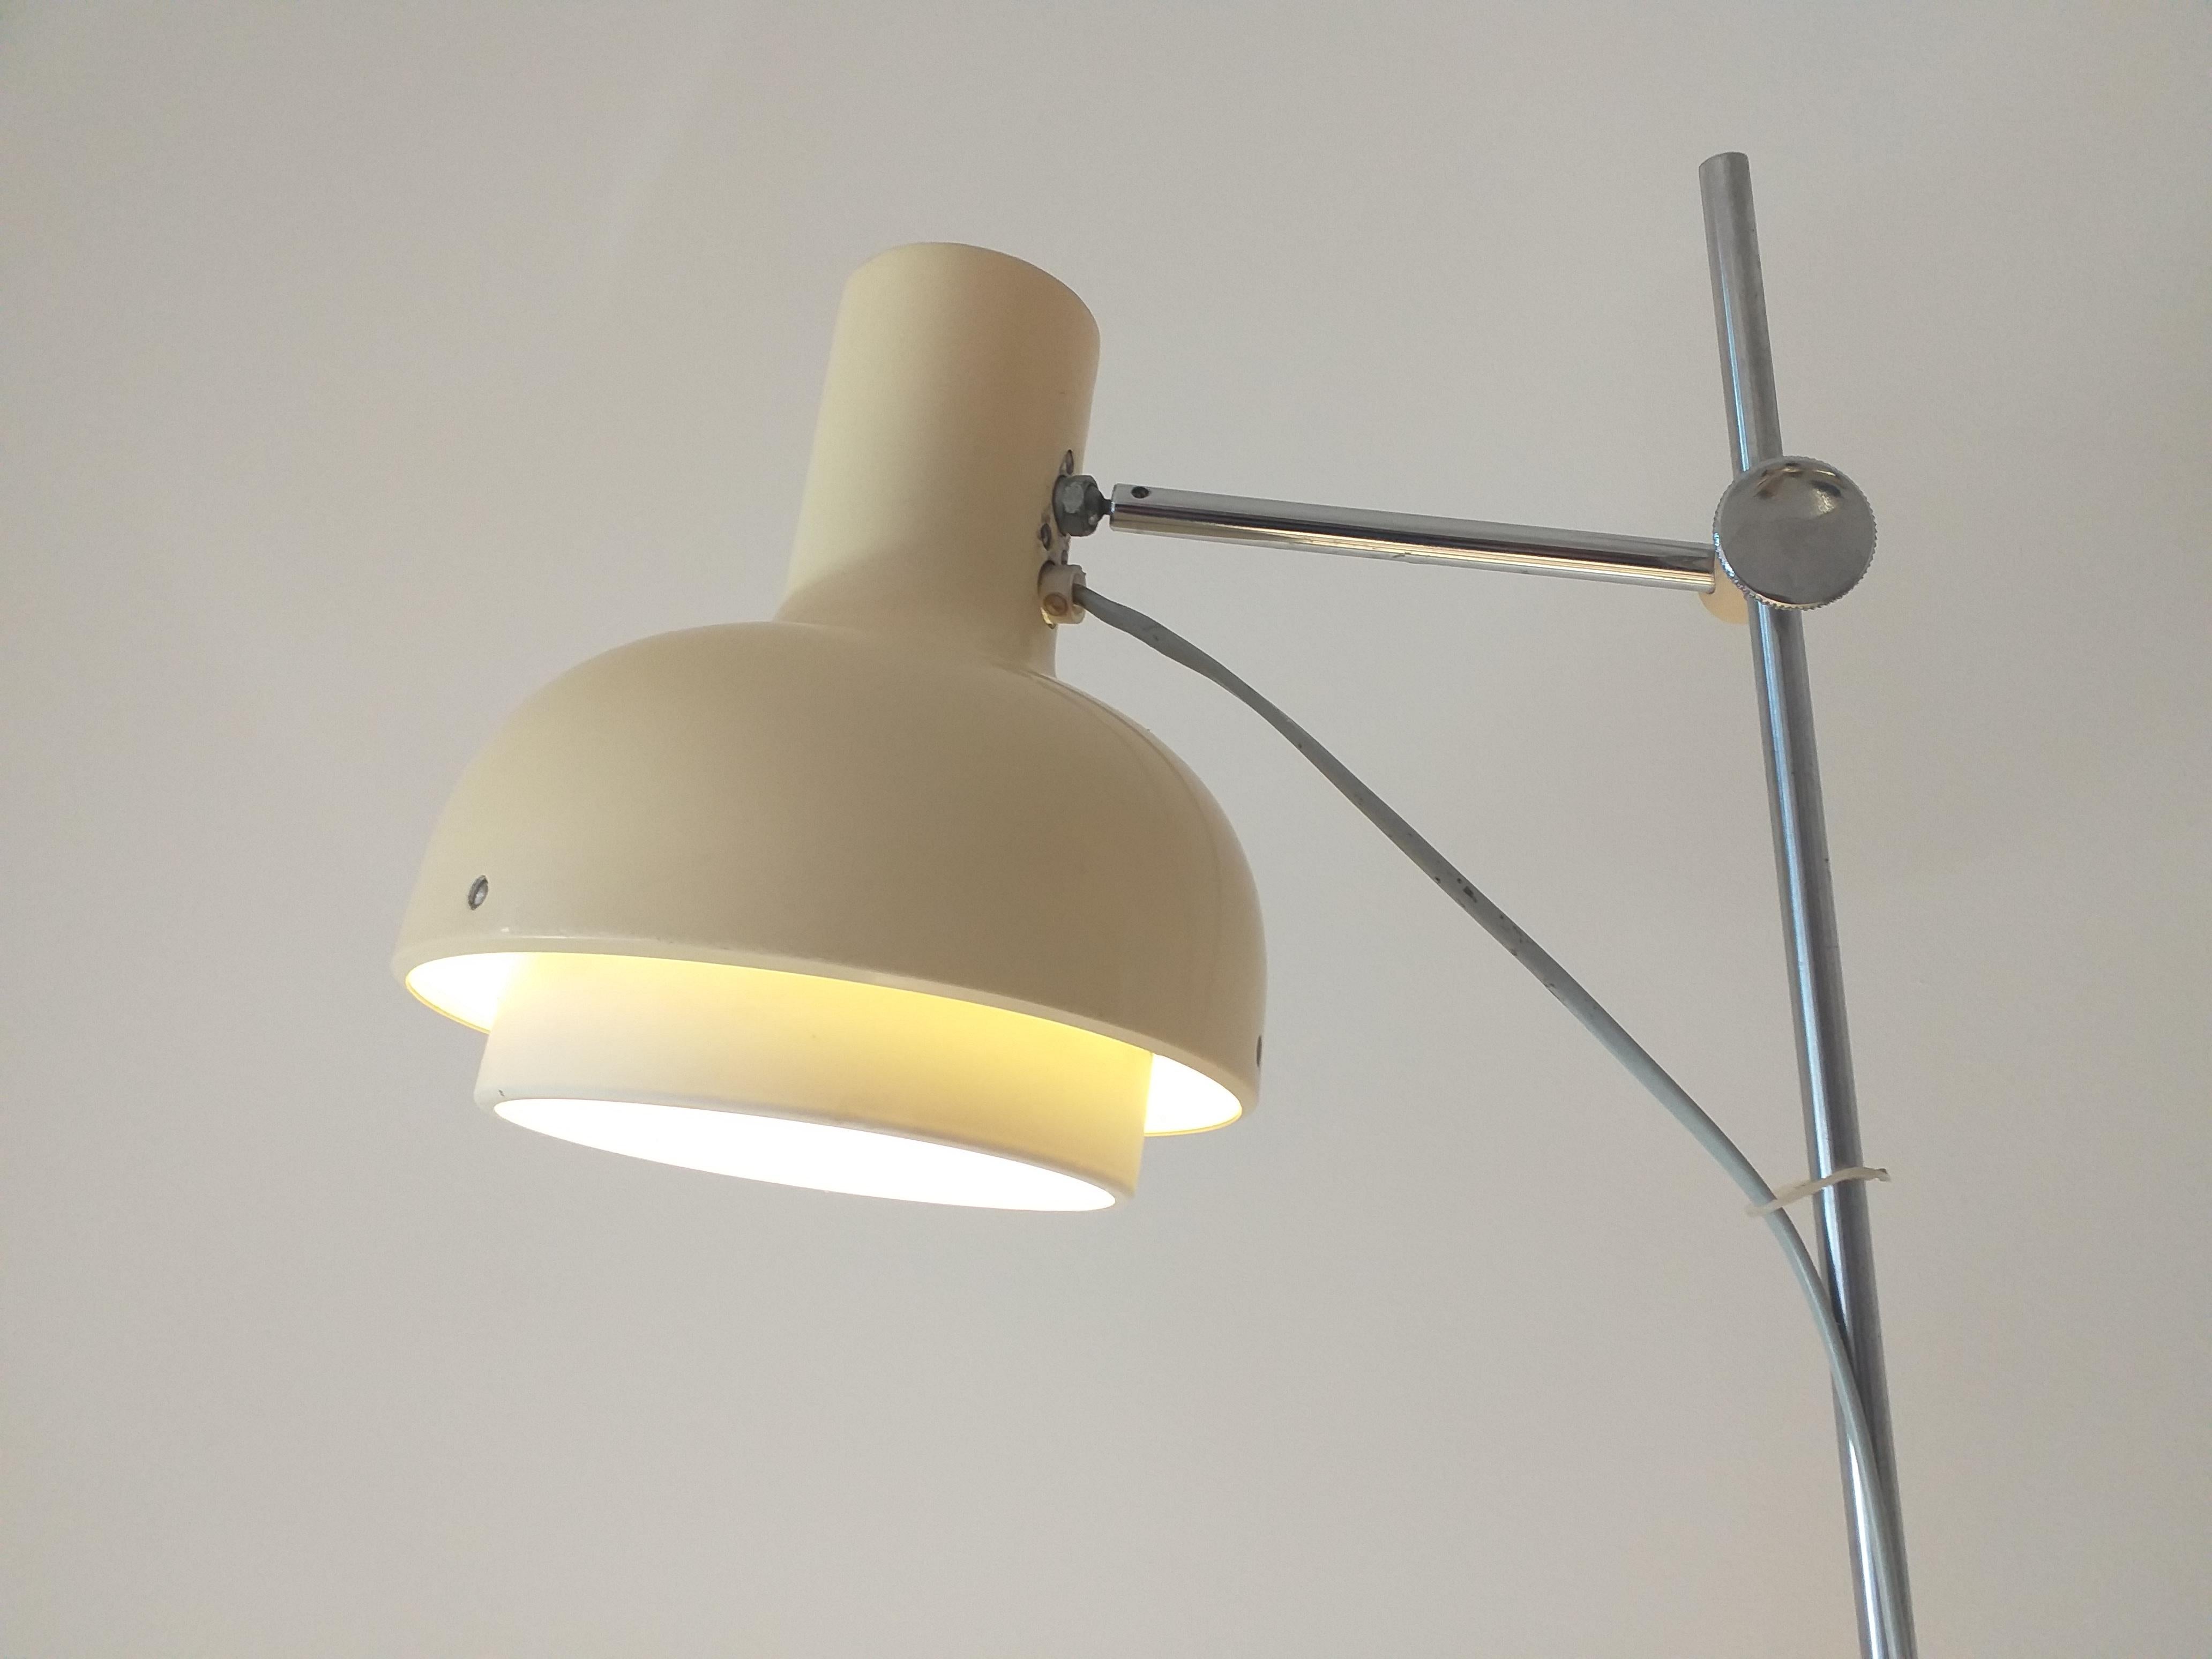 - Very nice style of lighting
- Adjustable
- Marked by label.